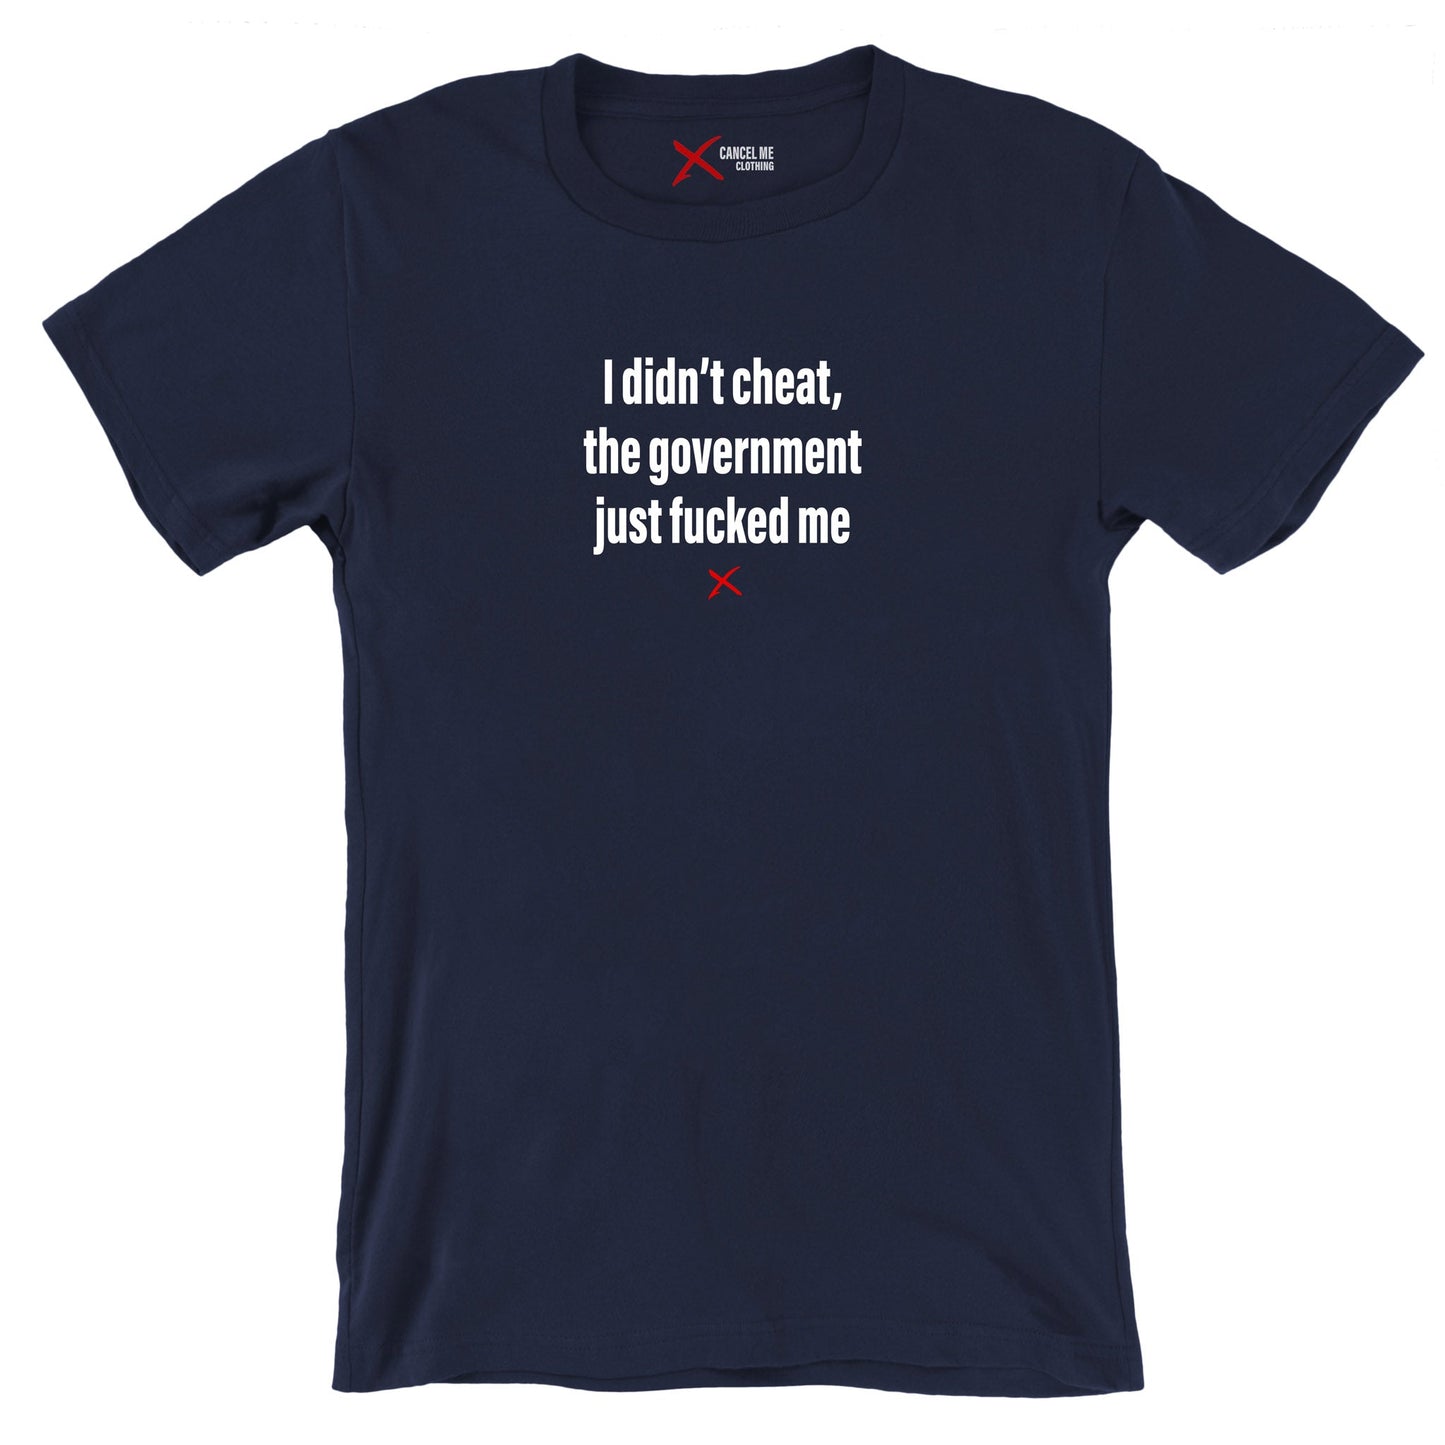 I didn't cheat, the government just fucked me - Shirt